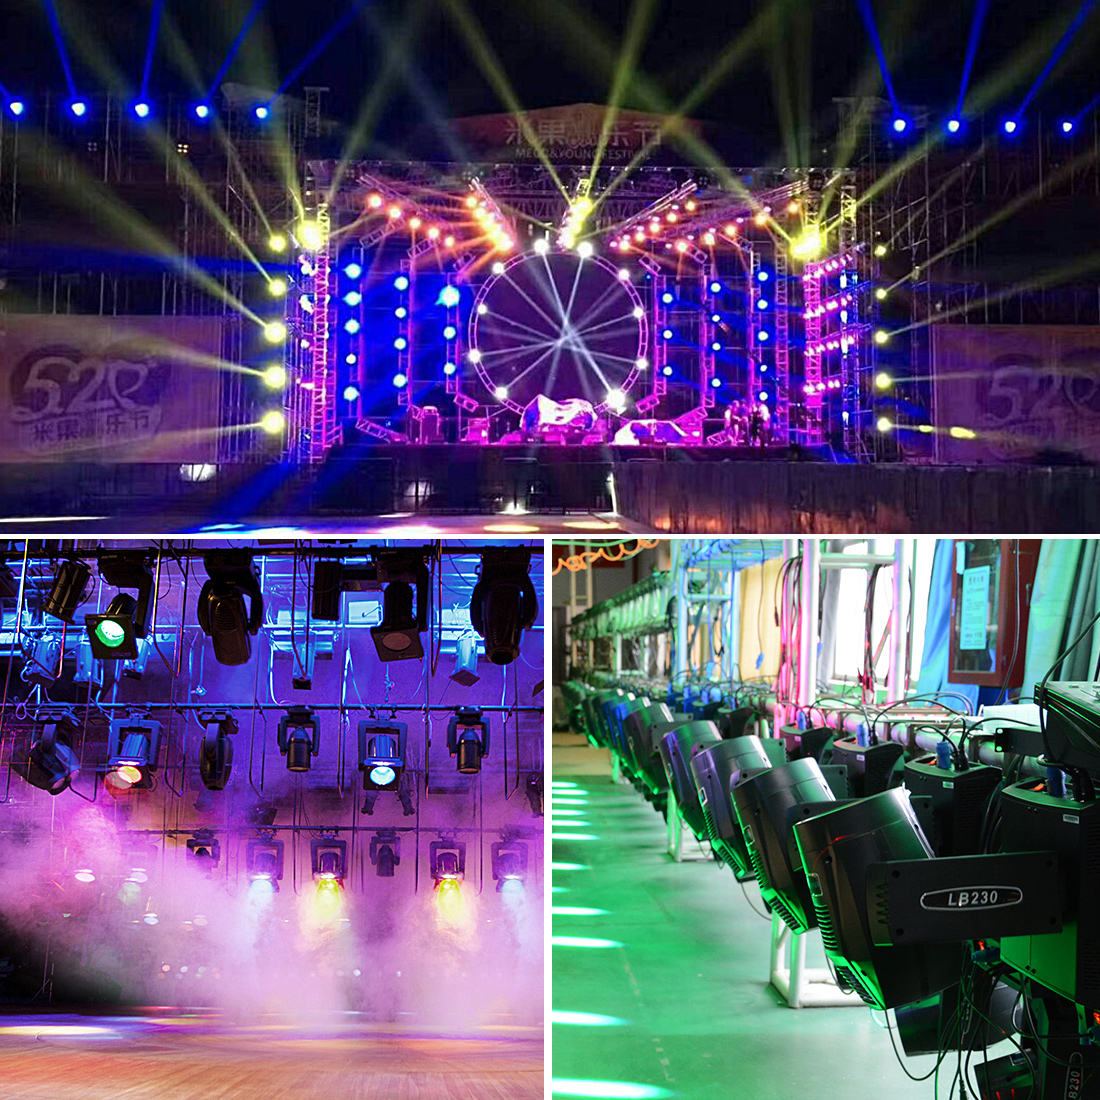 Big Dipperl beam light 7R 230w LB230 Stage Led Light Moving Head Light for mobile dj gigs Xmas birthday party bar club and music